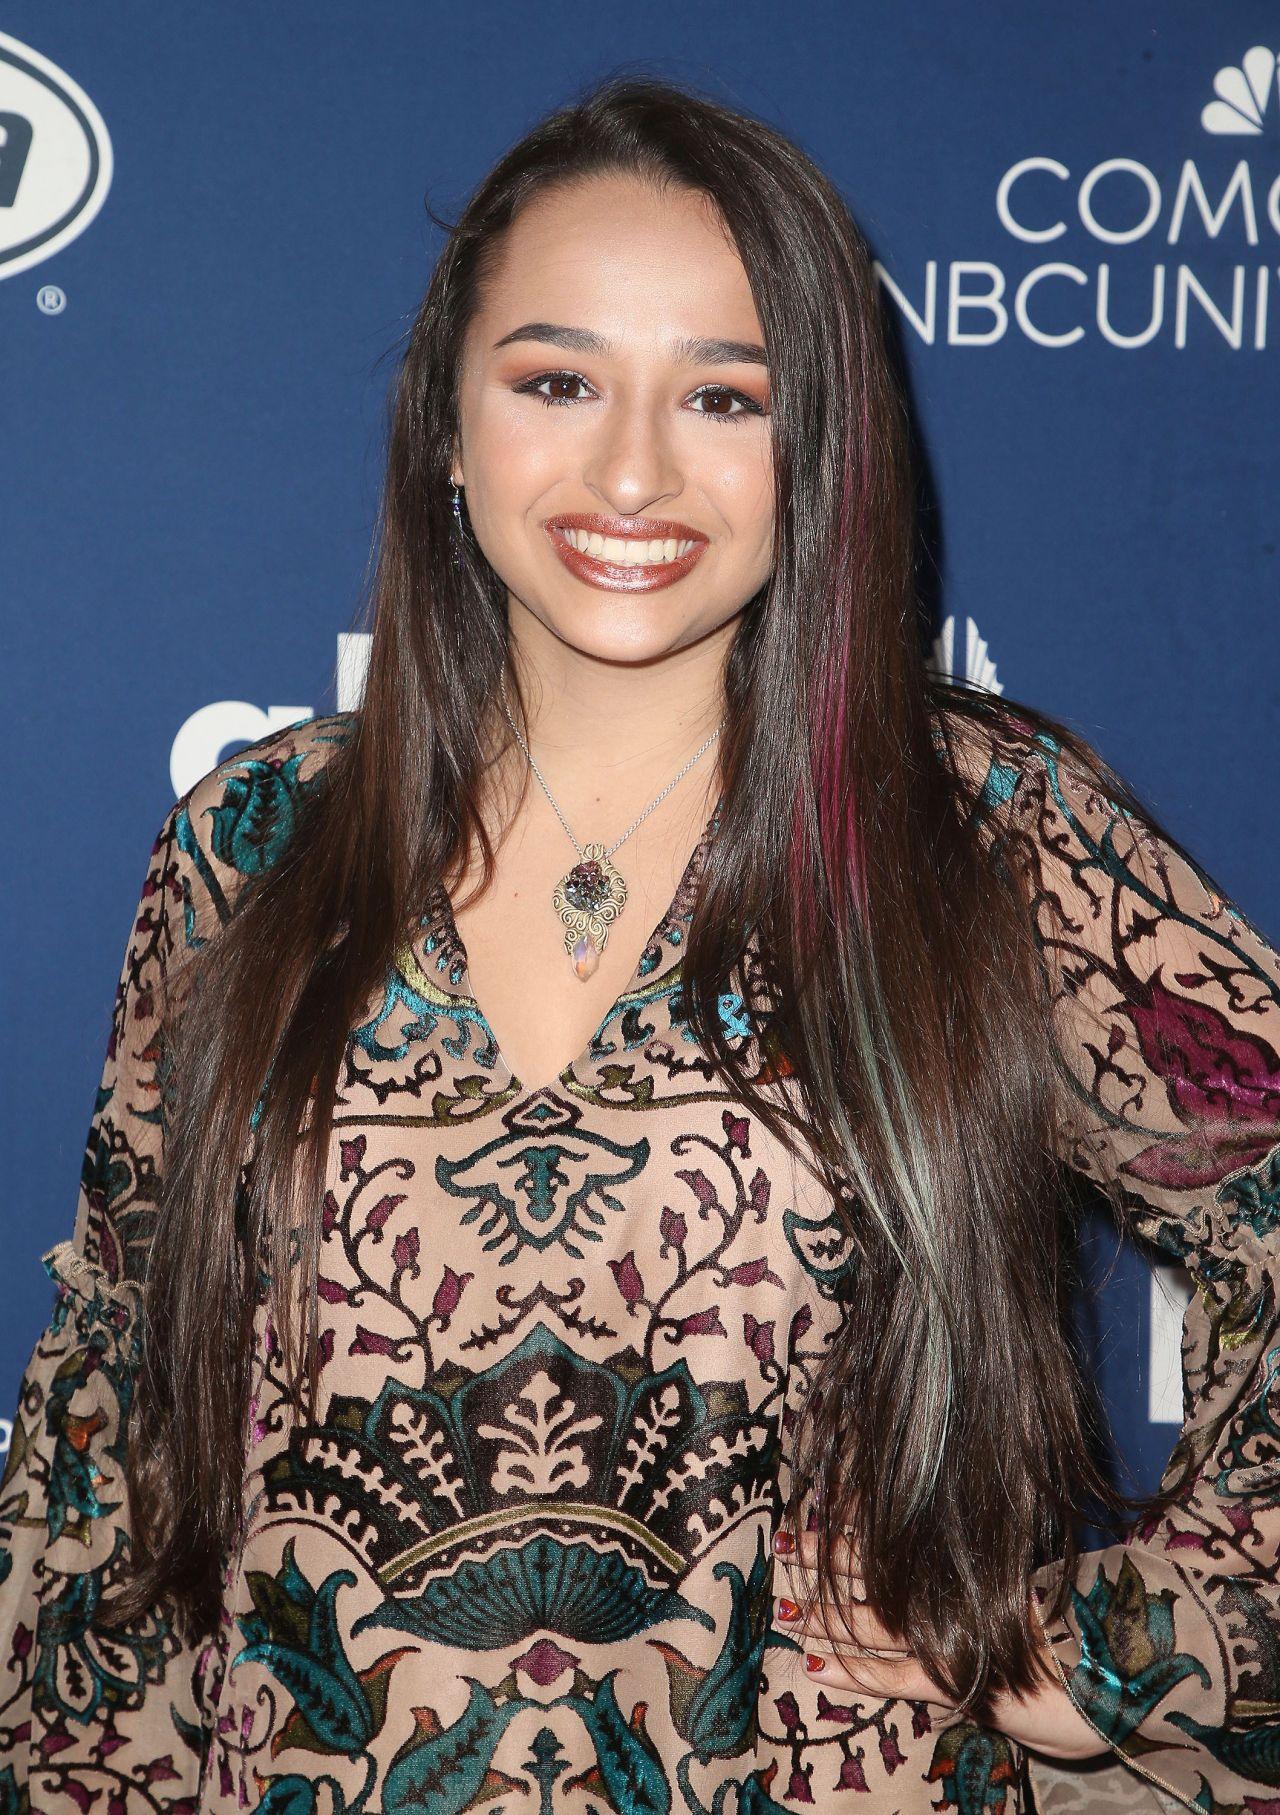 70+ Hot Pictures Of Jazz Jennings Which Will Make Your Mouth Water 56